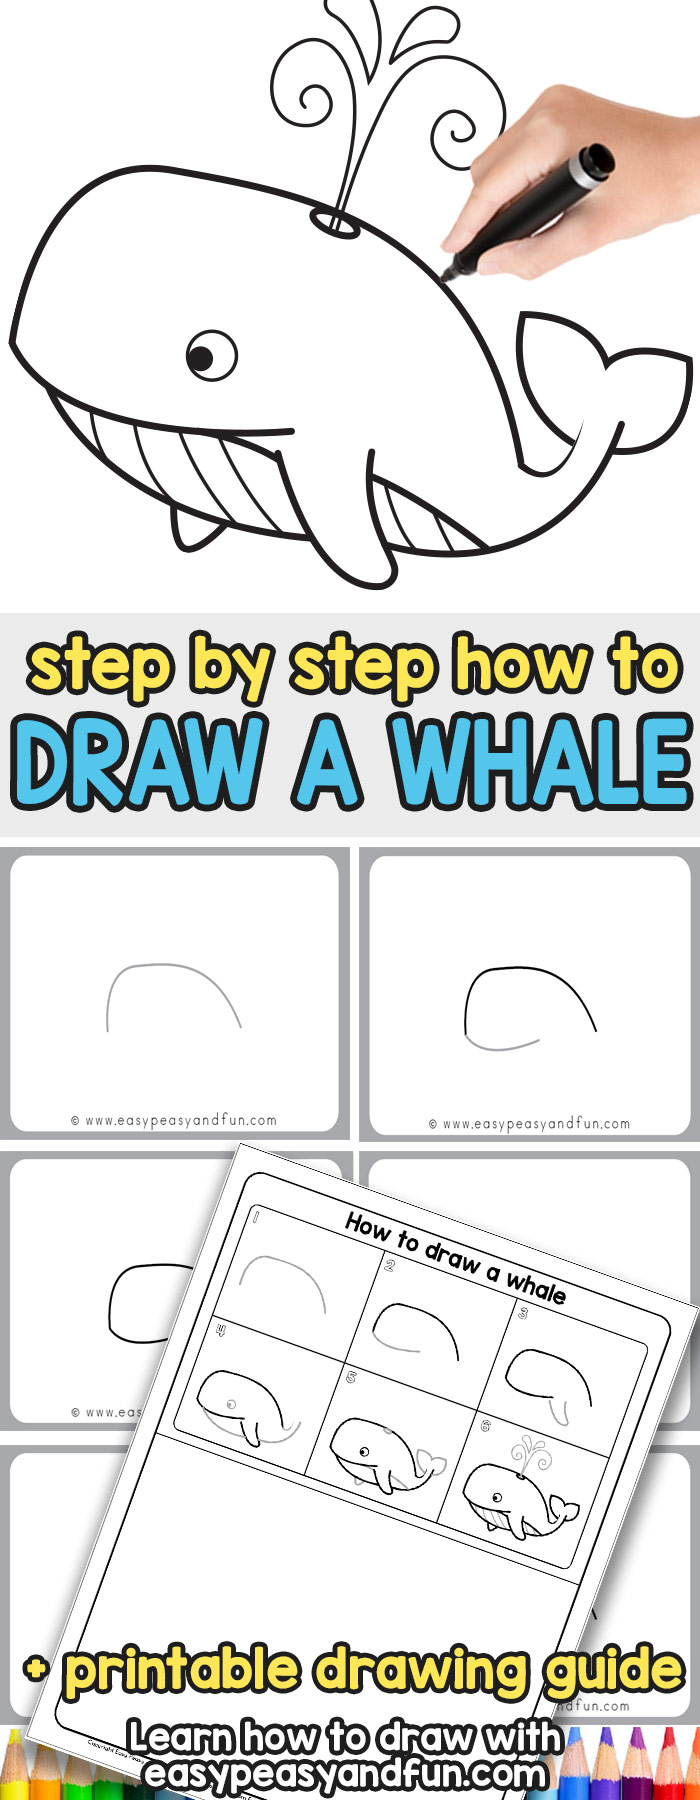 How to Draw a Whale Step by Step (cartoon style)